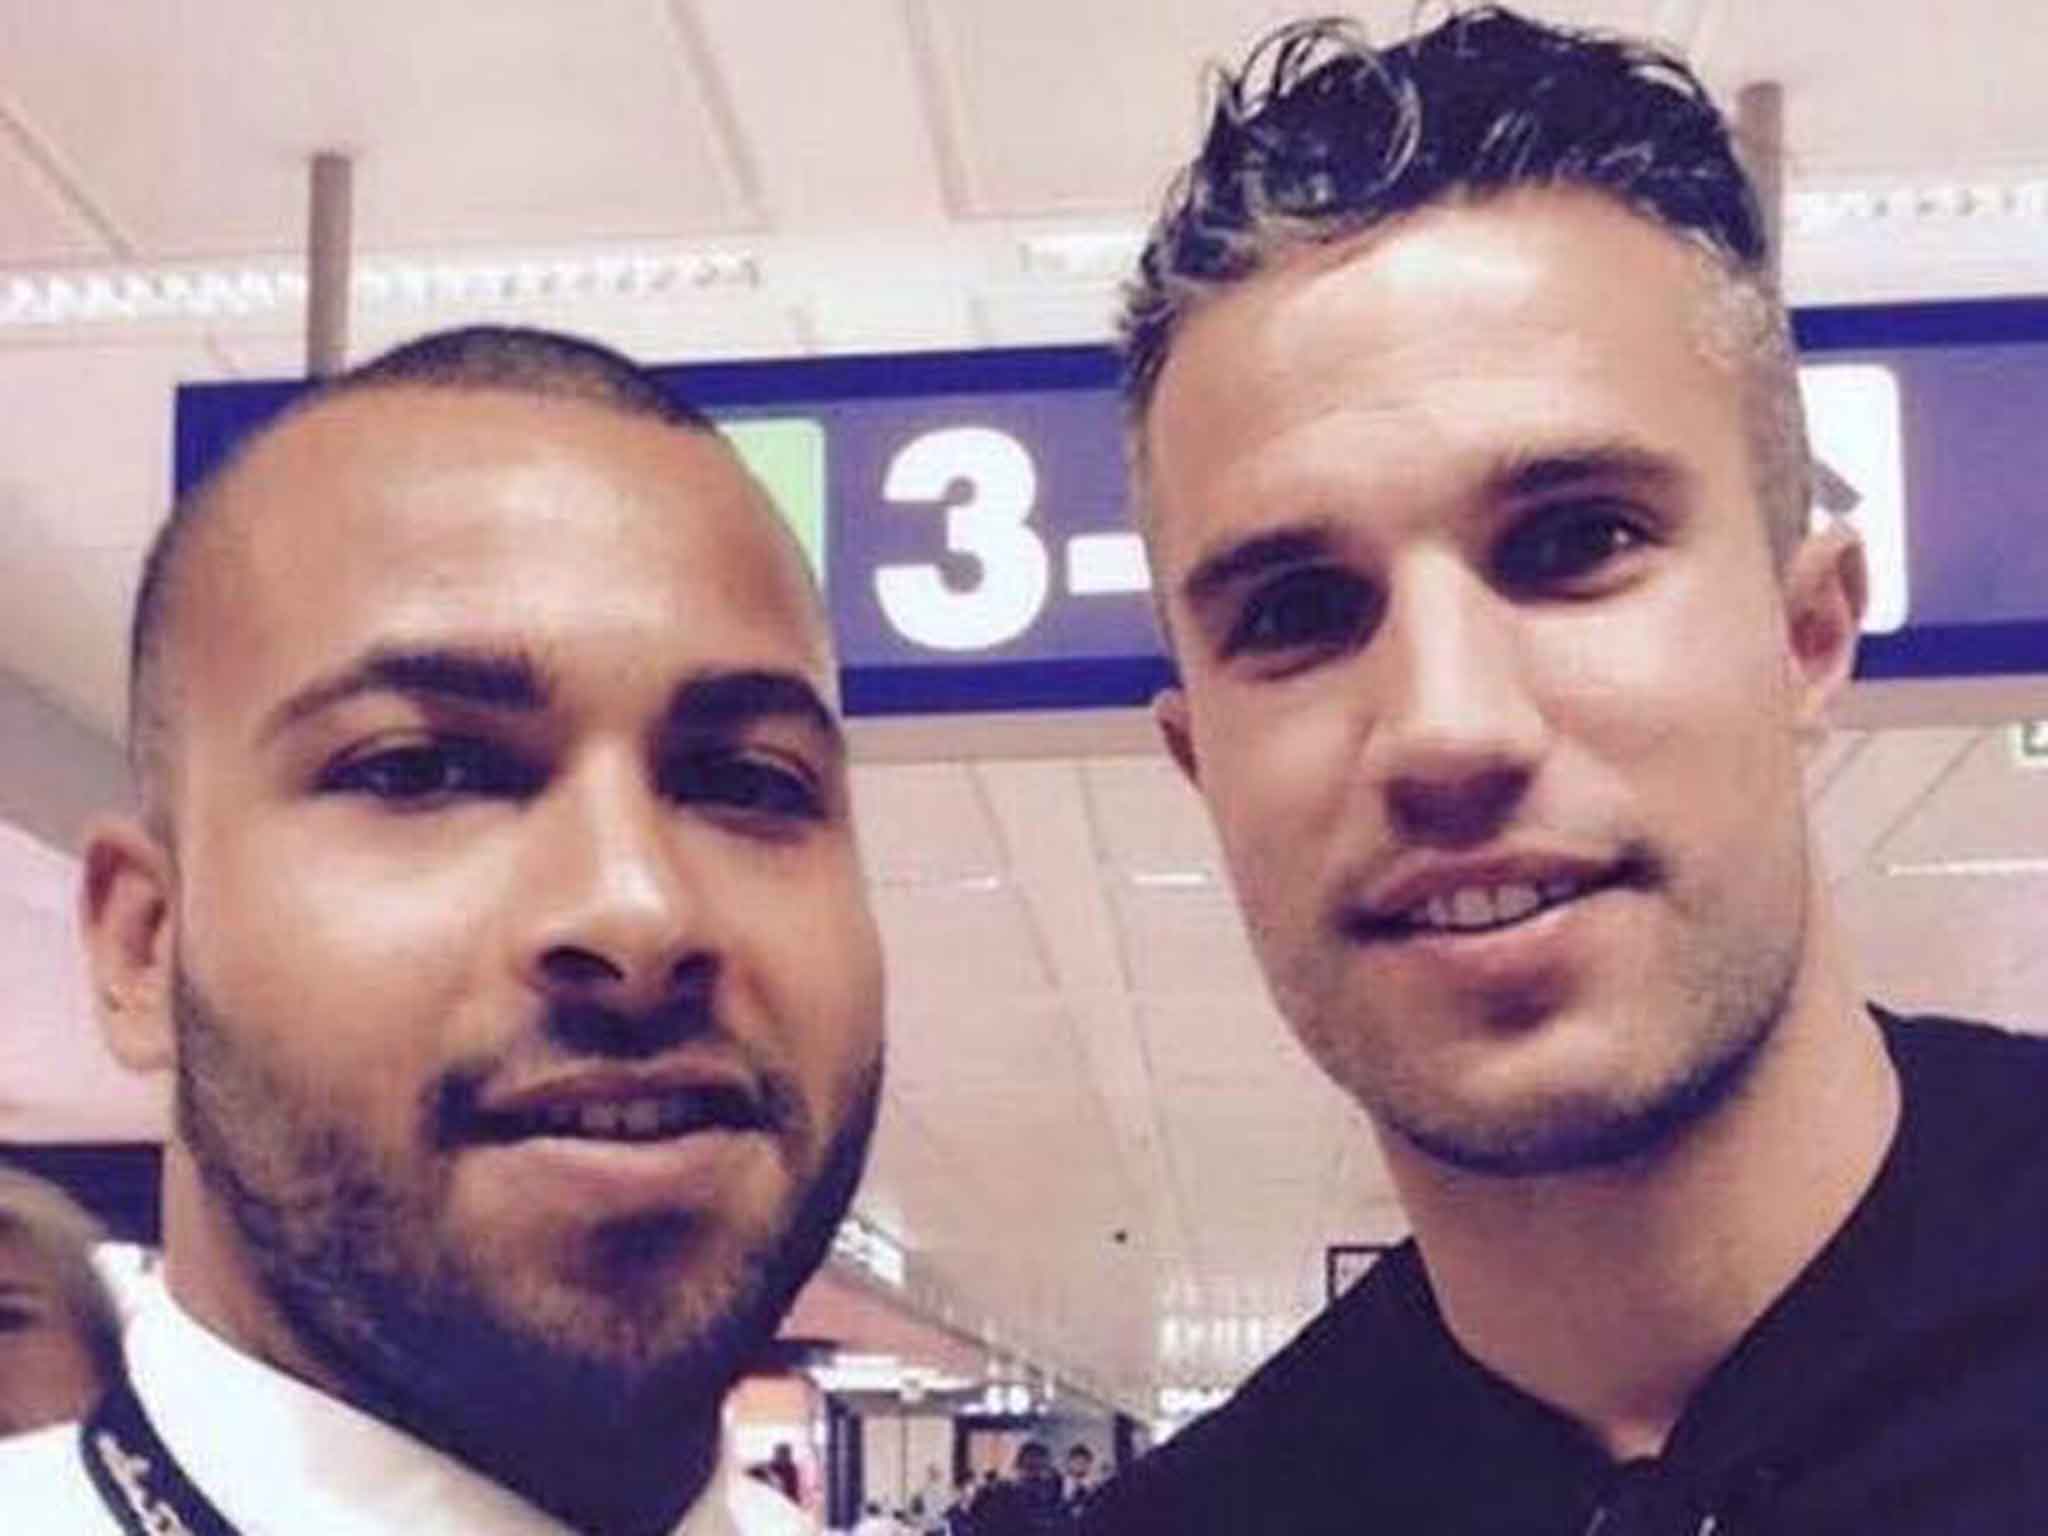 Robin van Persie pictured with a fan at Rome's Fiumicino Airport